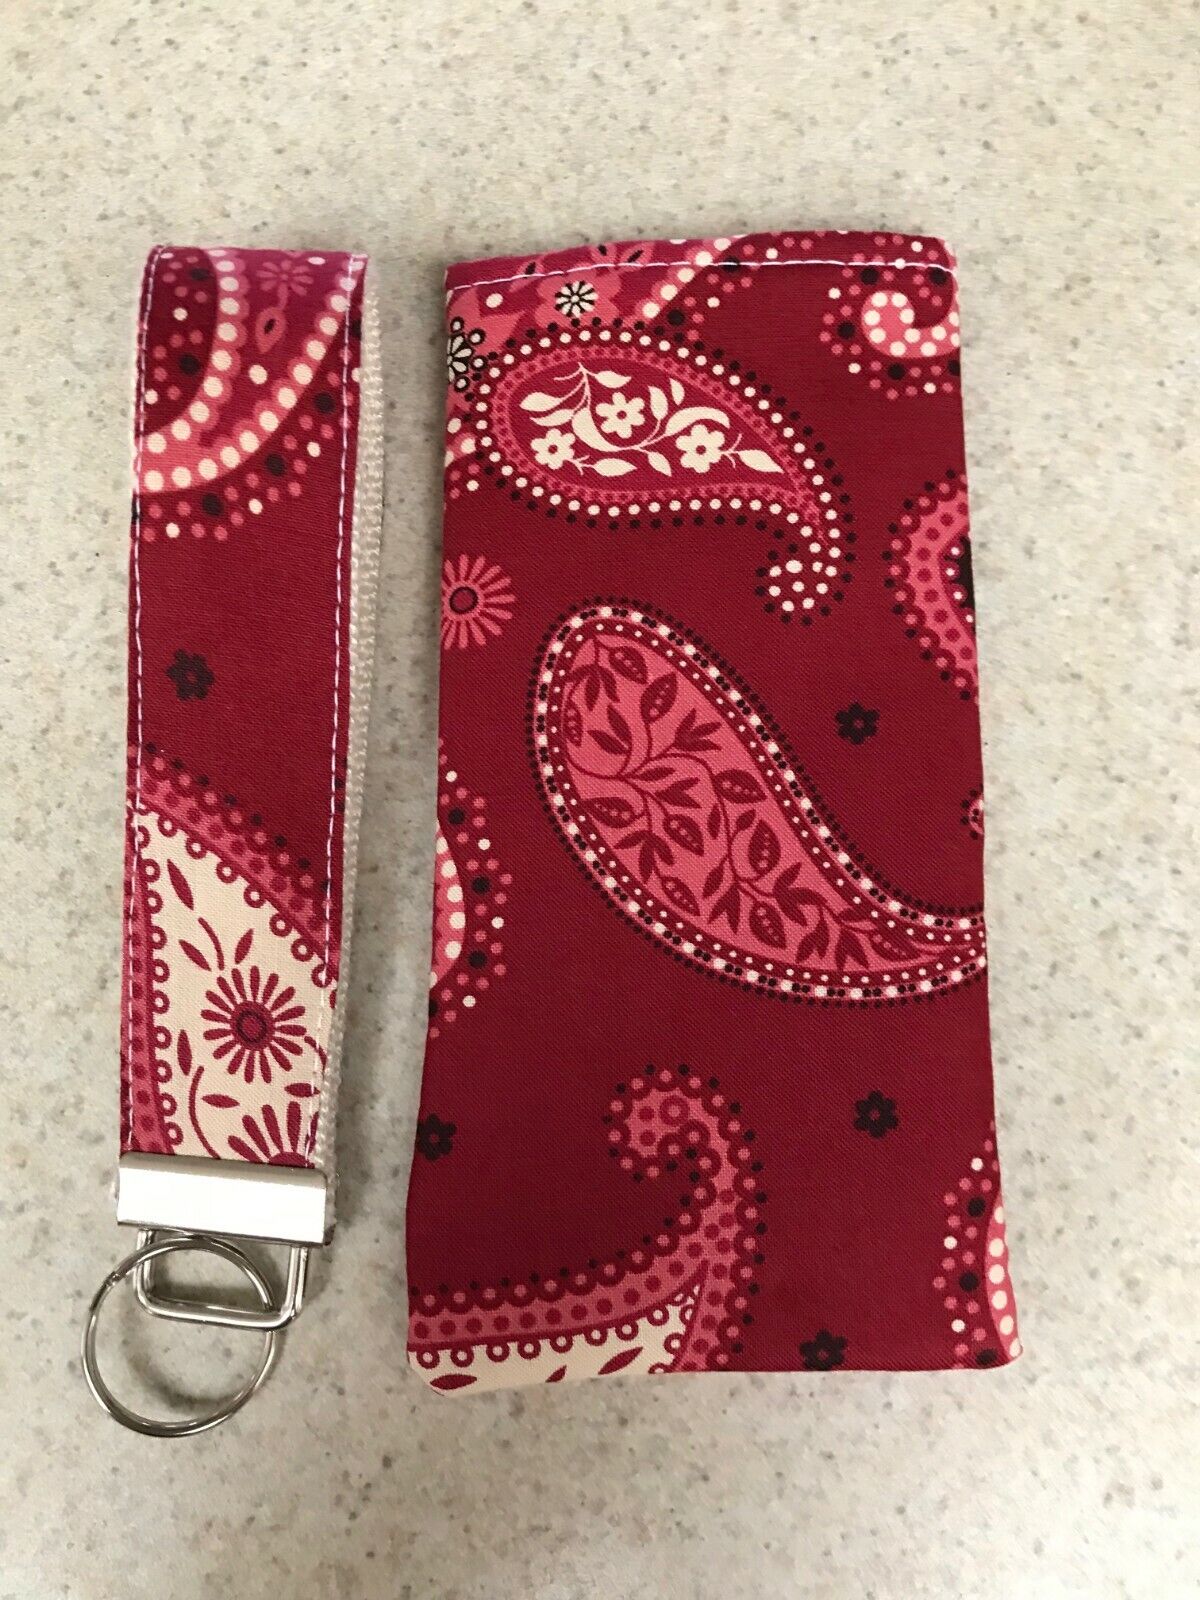  Sunglass Case & Wristlet Style Key Fob - Classic Mesa Red - Gift Set - NEW!